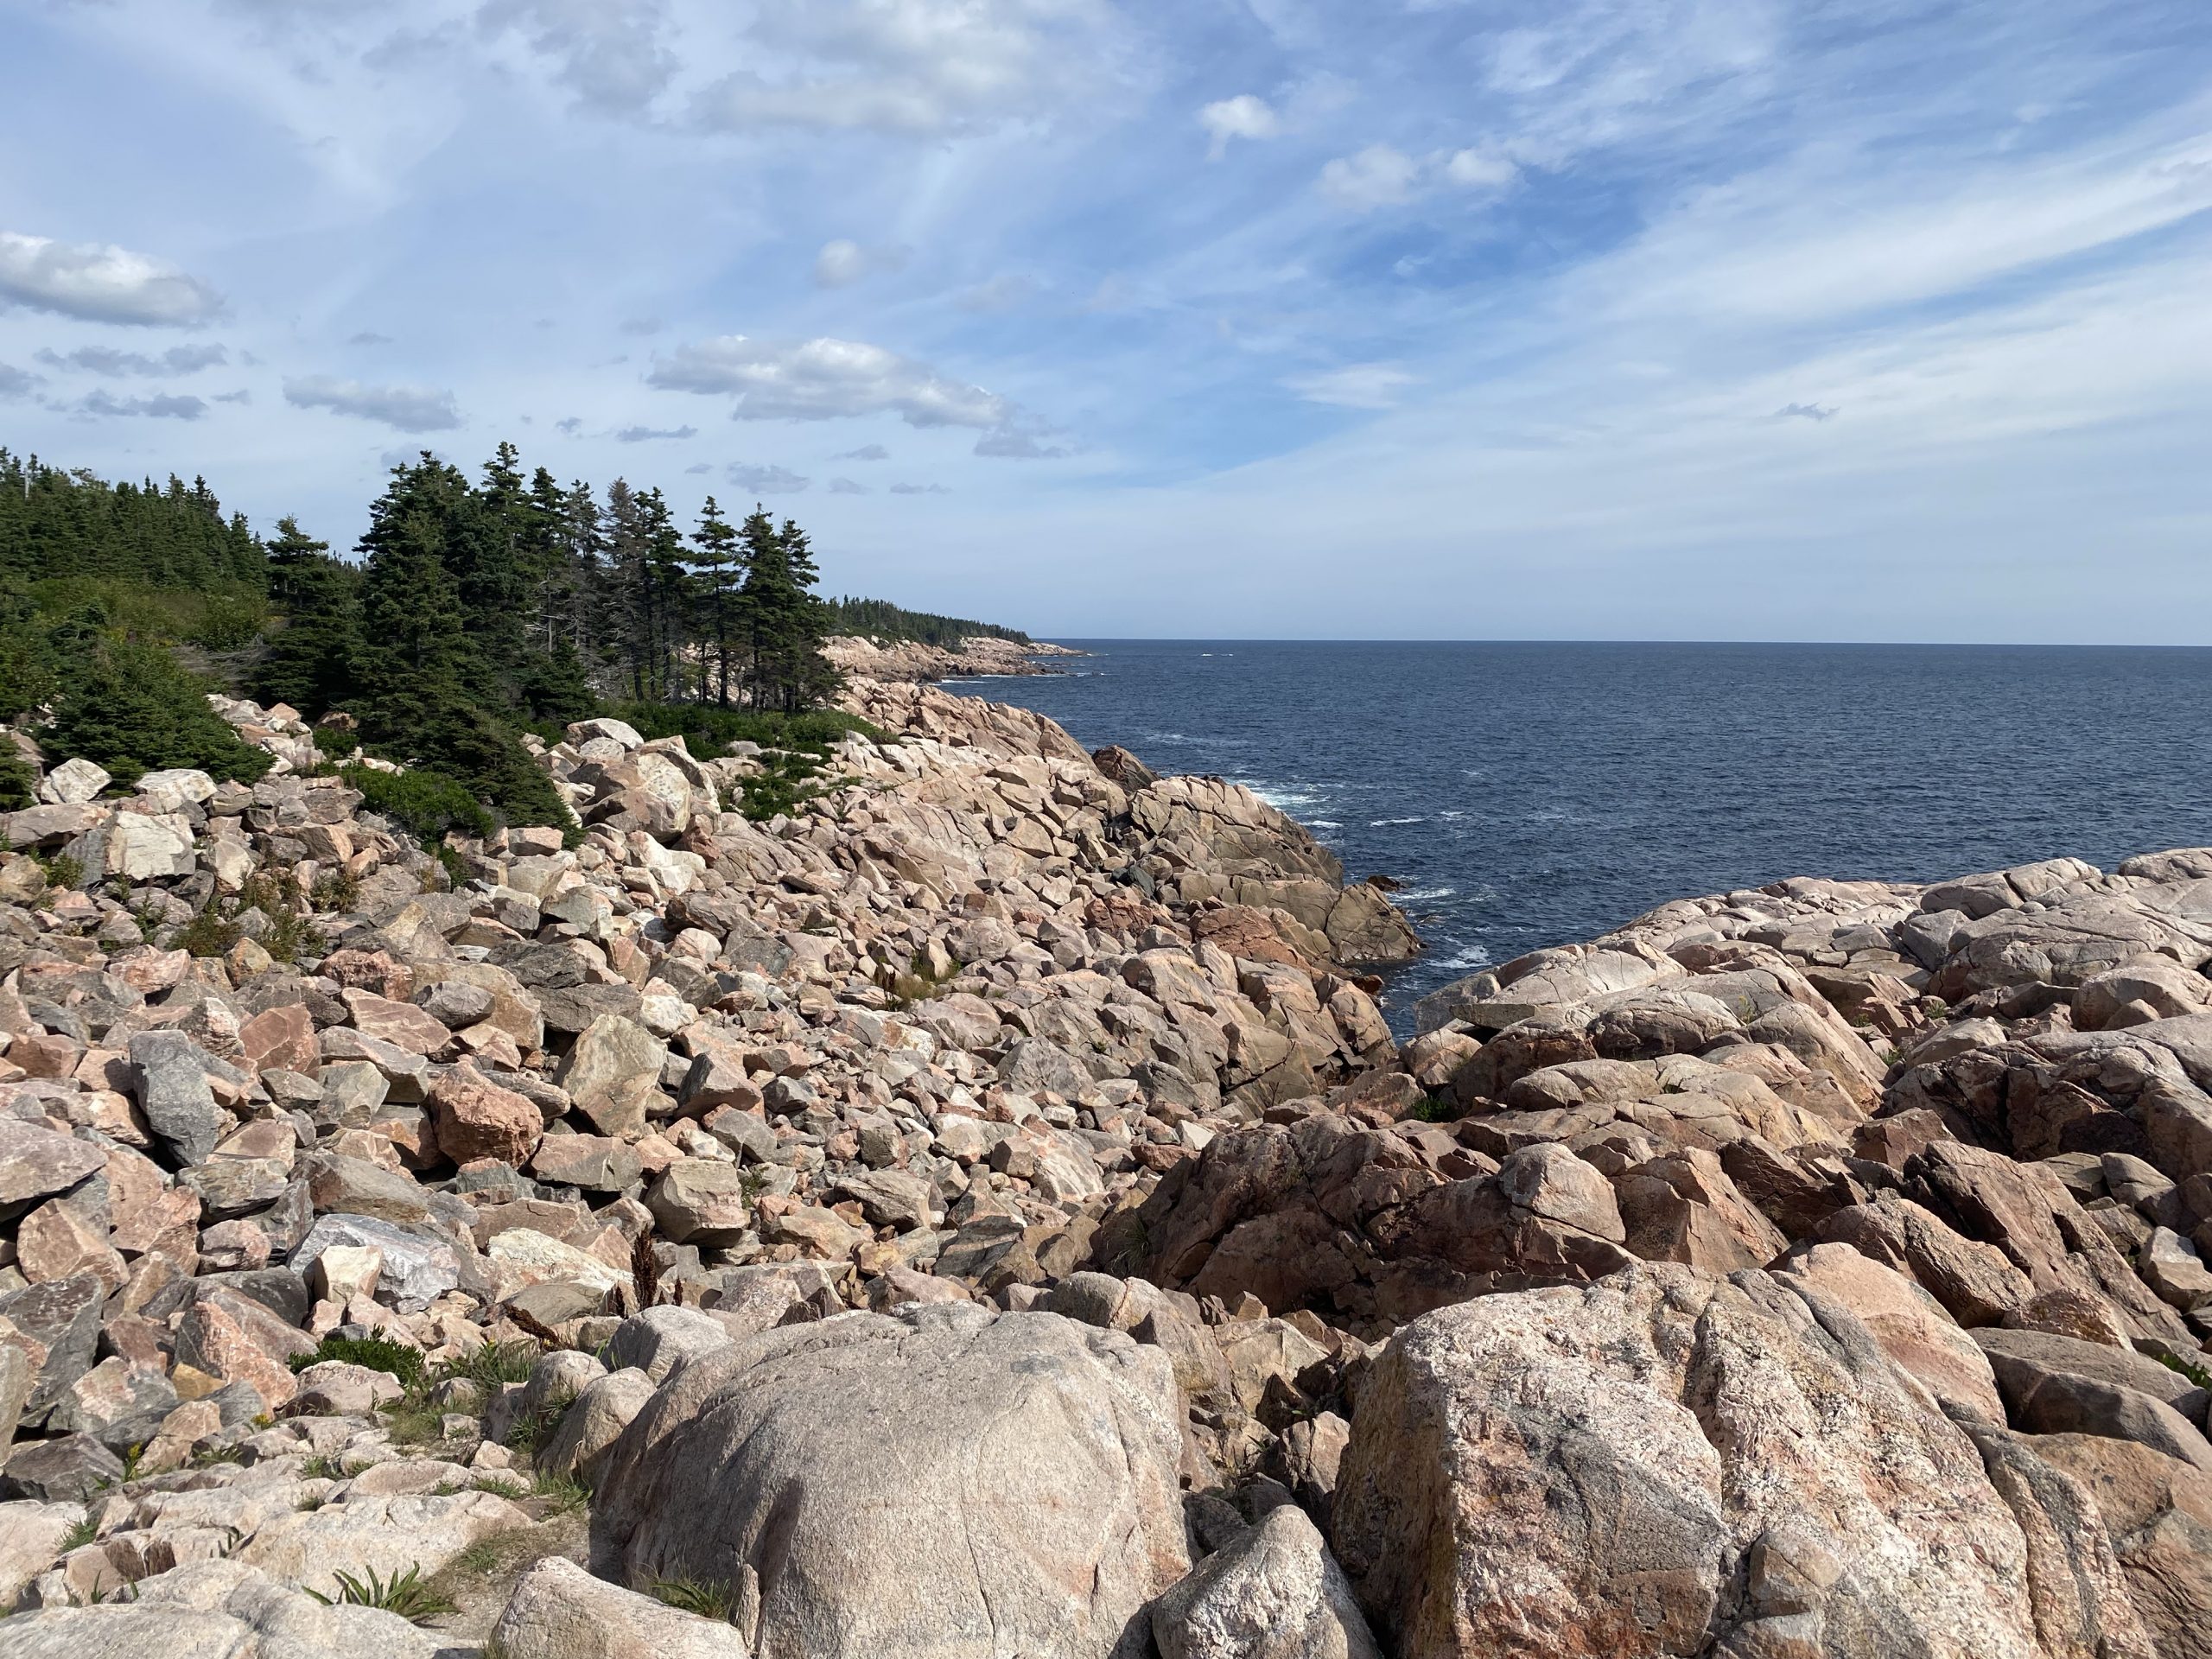 A view of the shoreline to the north of Ingonish along the Cabot Trail in Nova Scotia.